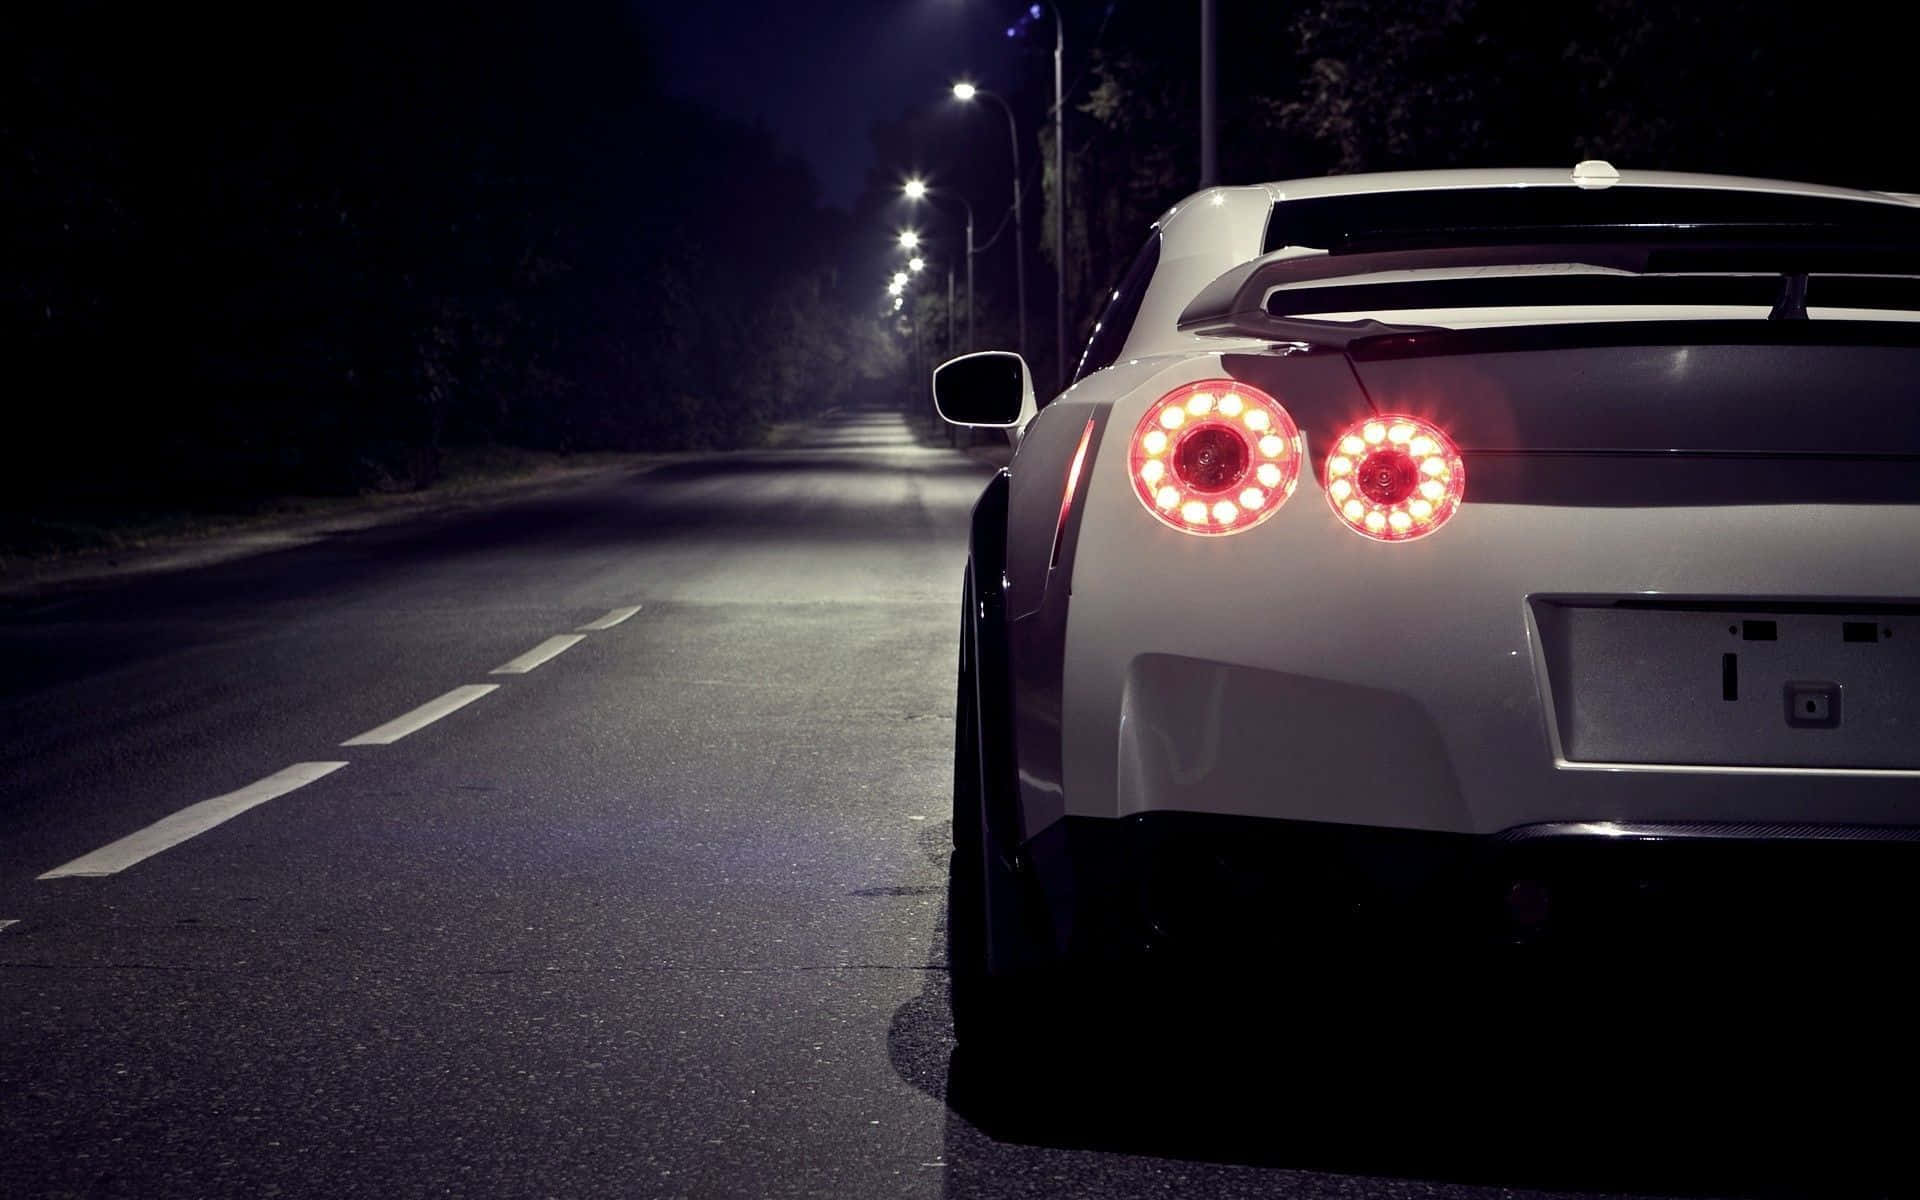 Get Cool & Stylish In The Nissan Gtr Background